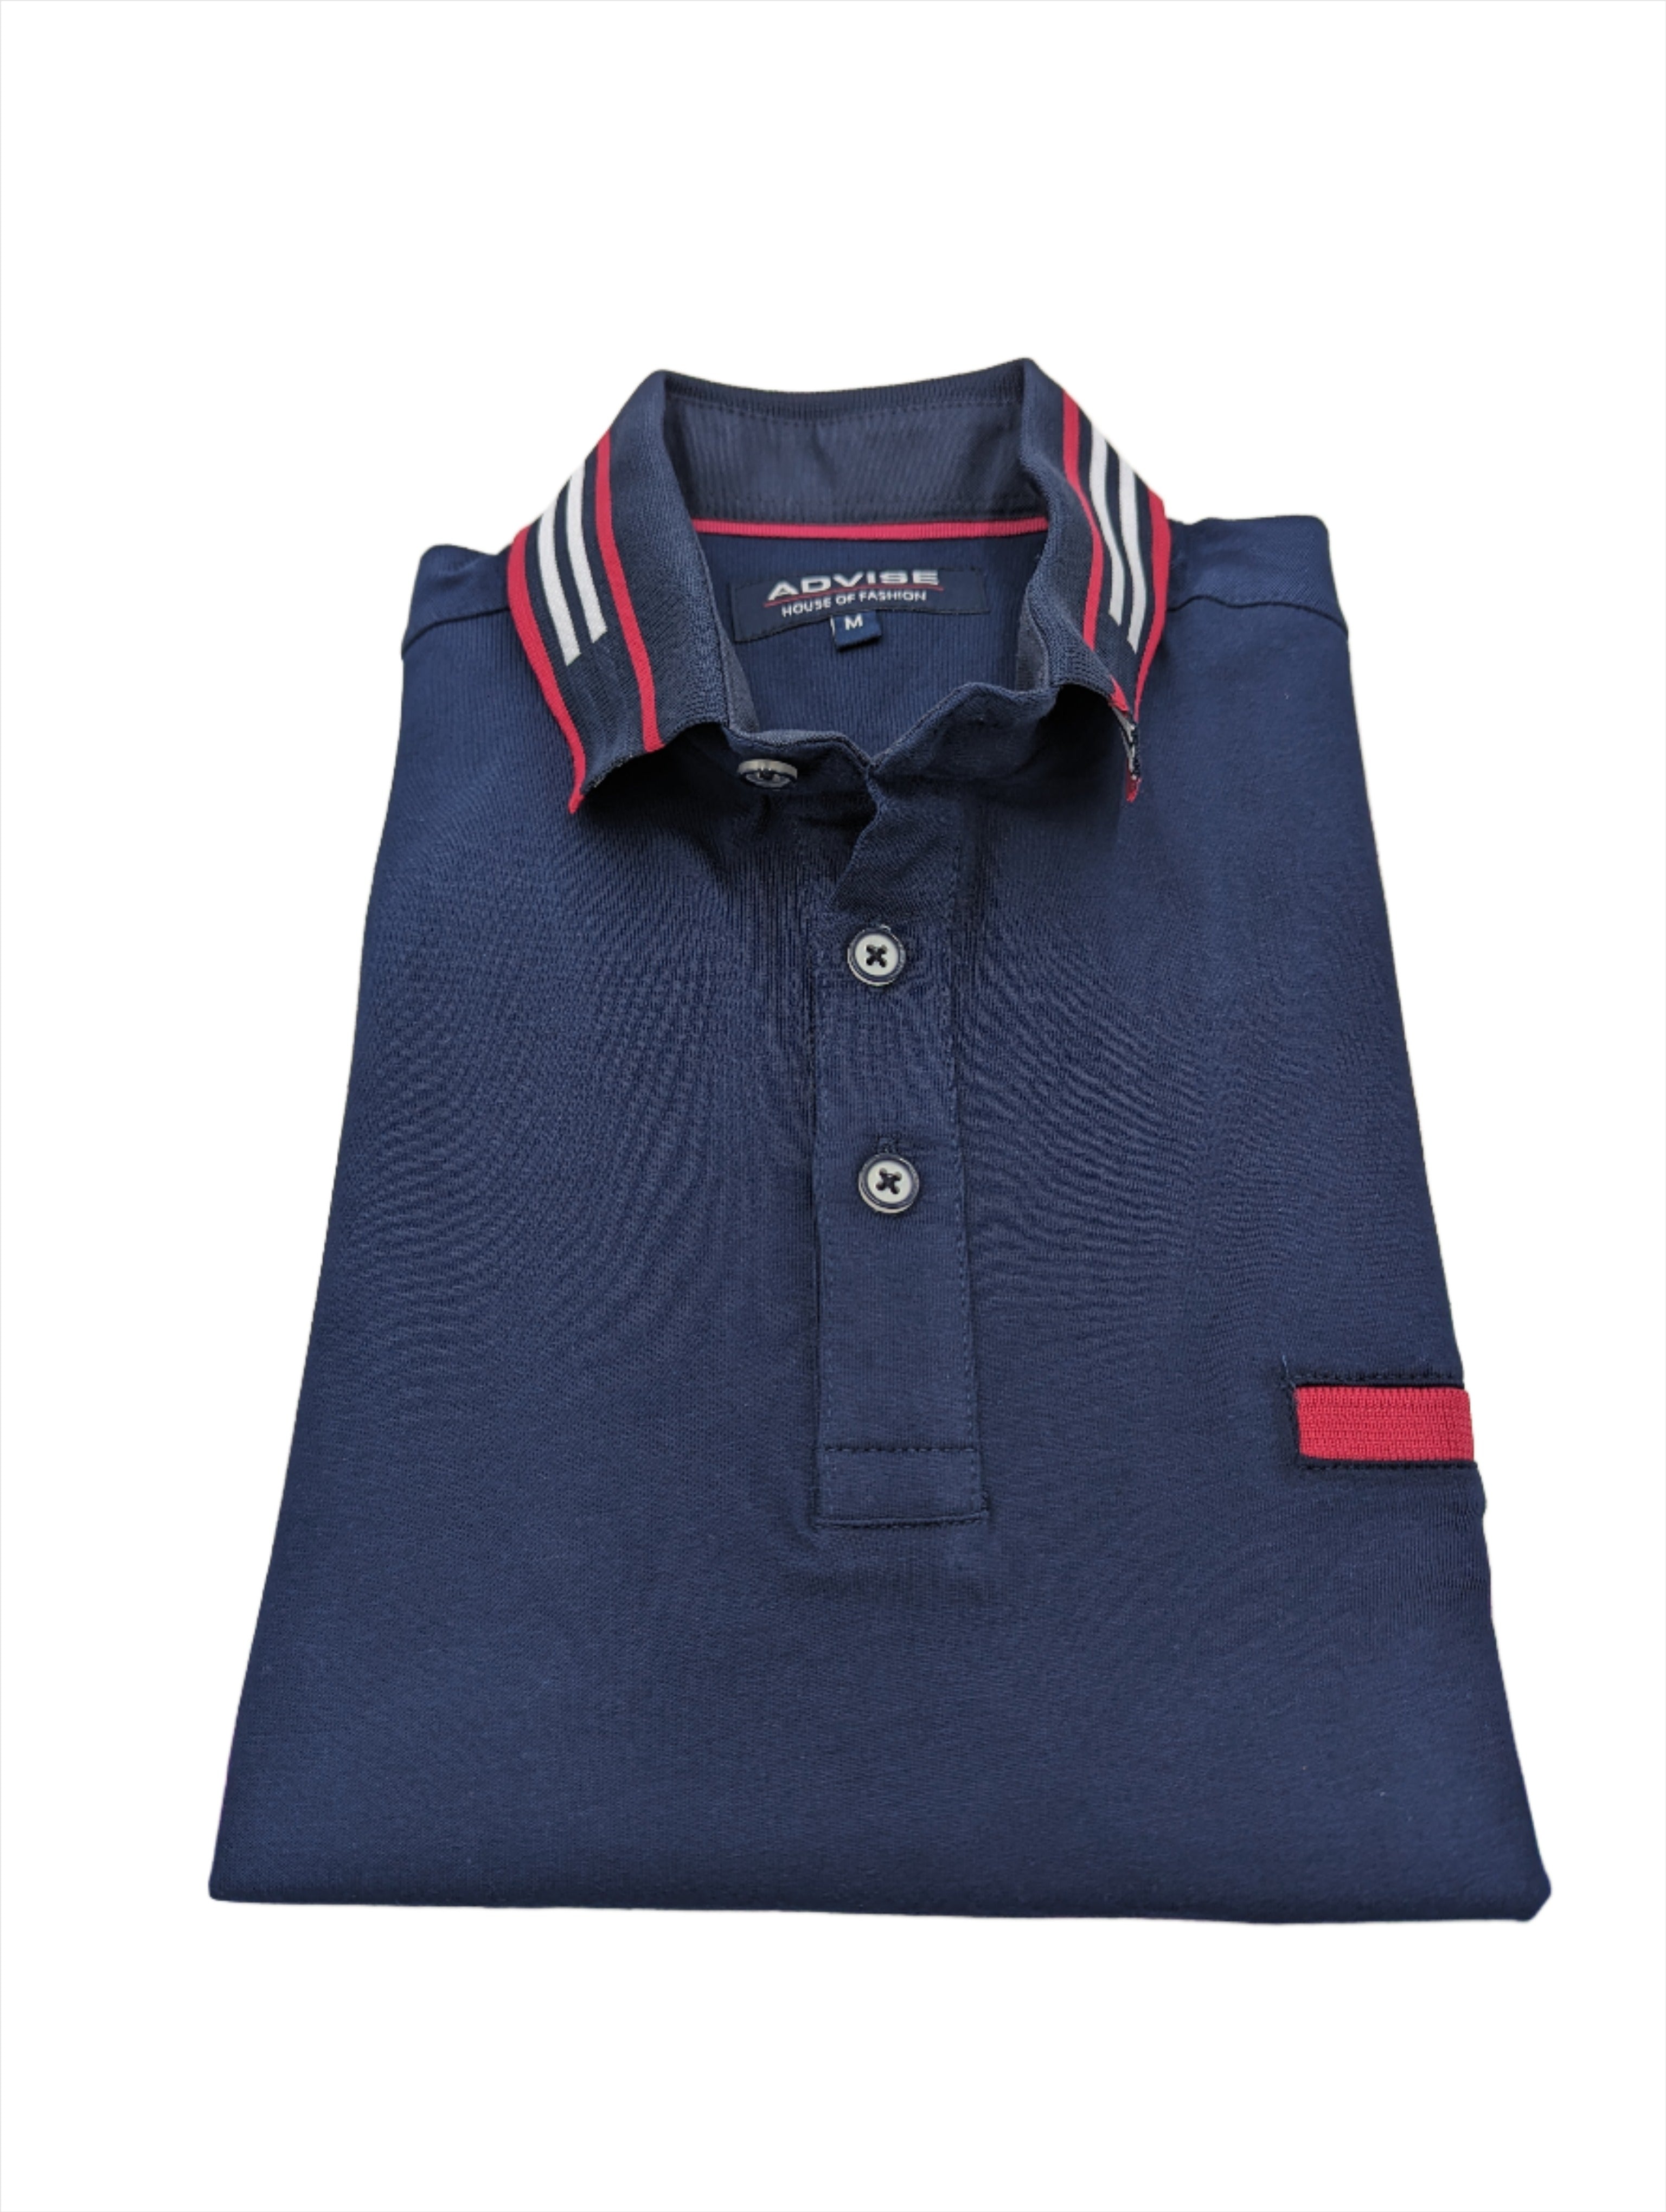 Advise  Navy Polo Shirt with red & white tipping 